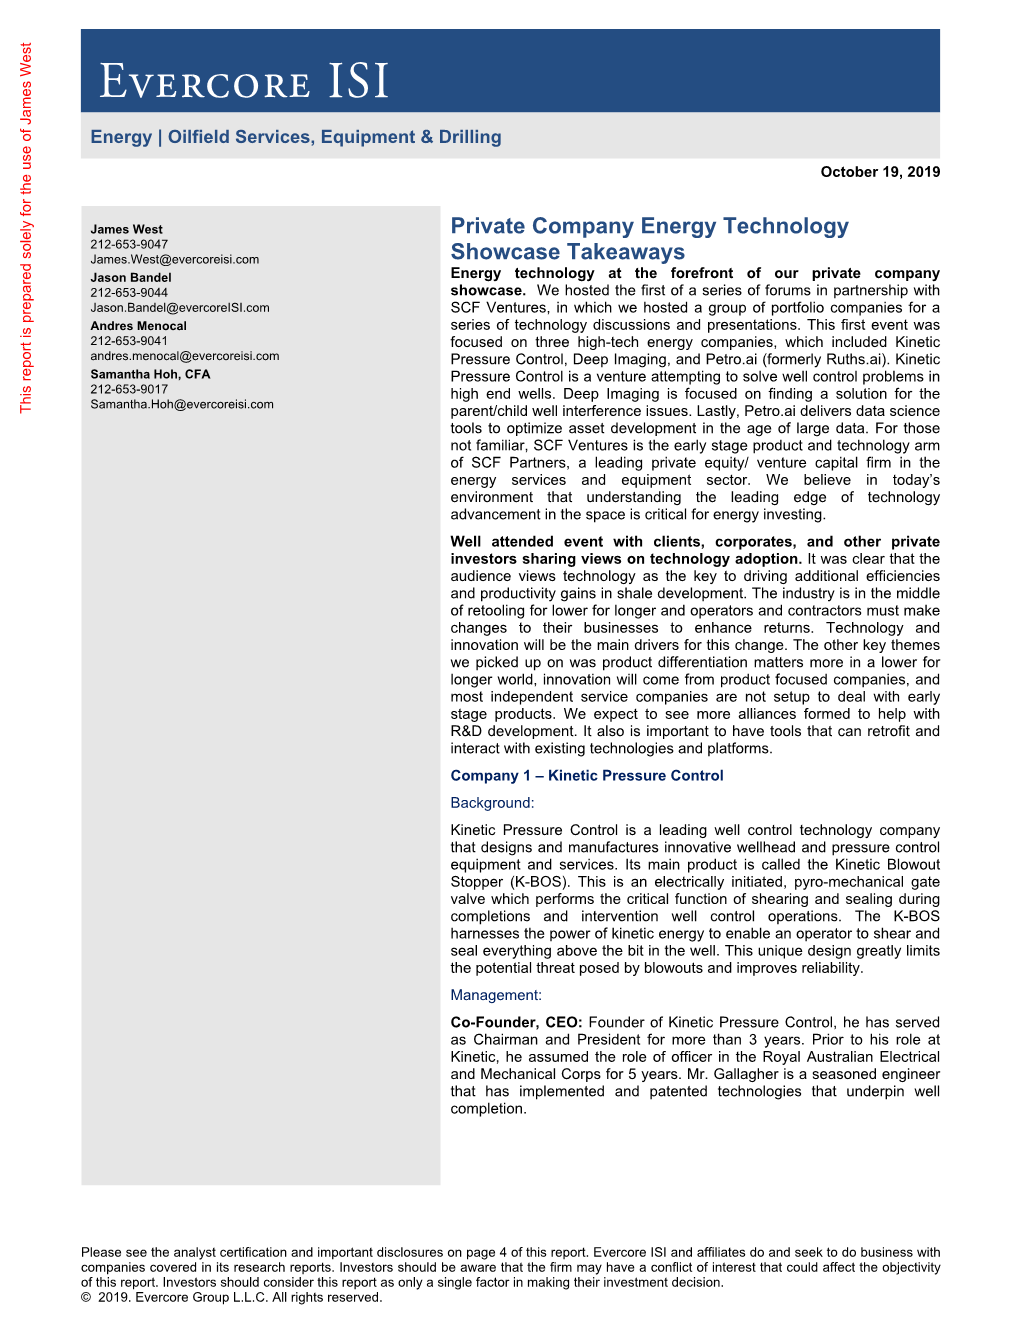 Private Company Energy Technology Showcase Takeaways